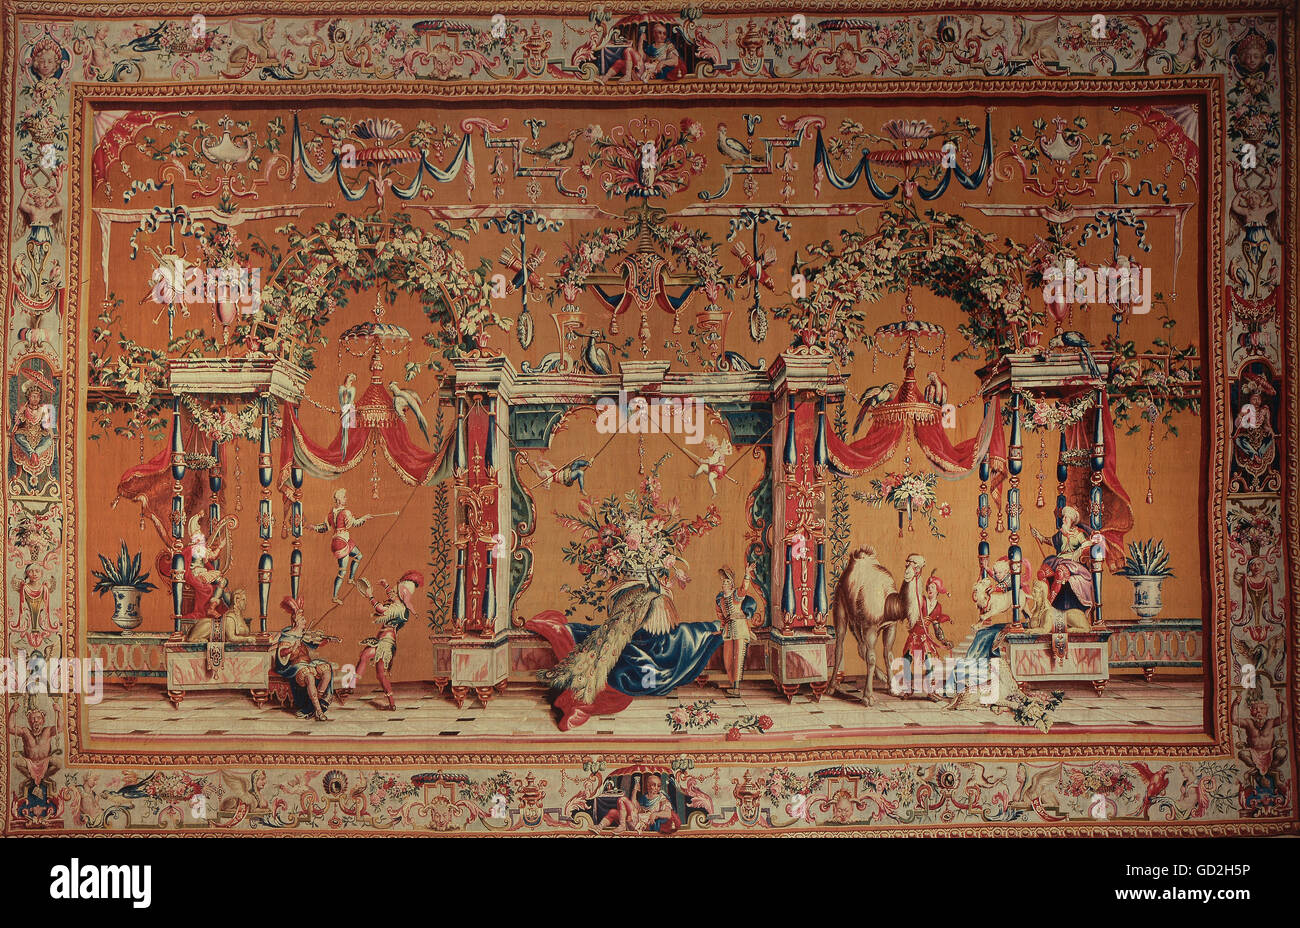 fine arts, tapestry, musicians and artists in phantastic architecture, from the grotesques series, by Philippe Behagle, after design by Jean Berain, Beauvais manufactory, circa 1700, silk, wool, knitted, 320 x 498 cm, Baden State Museum, Bruchsal castle, Artist's Copyright has not to be cleared Stock Photo